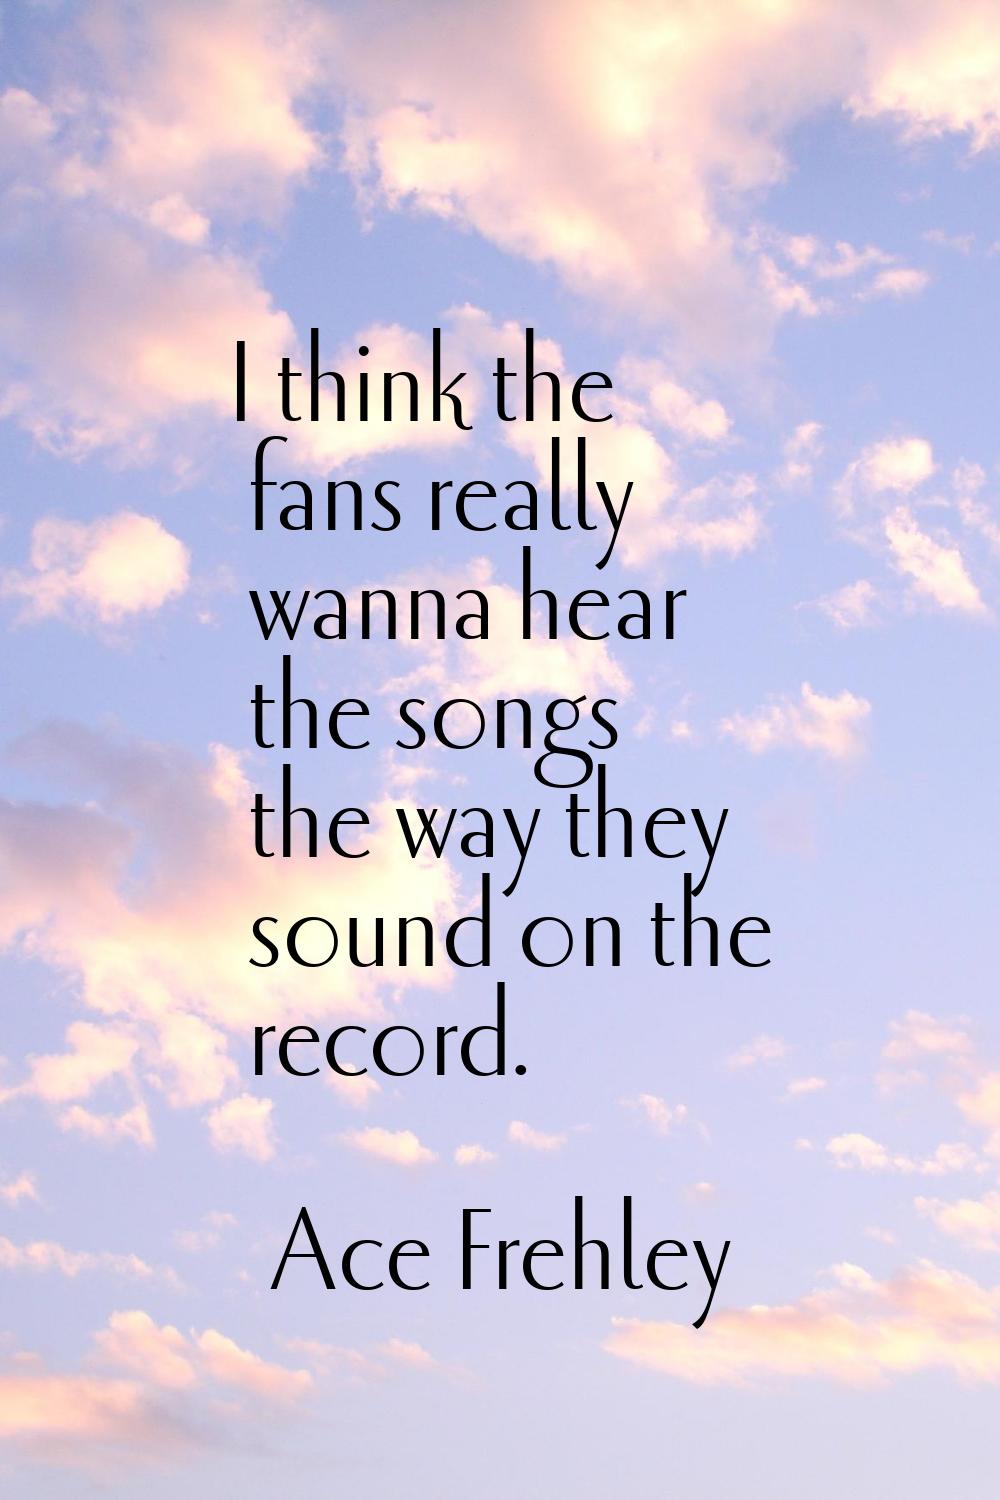 I think the fans really wanna hear the songs the way they sound on the record.